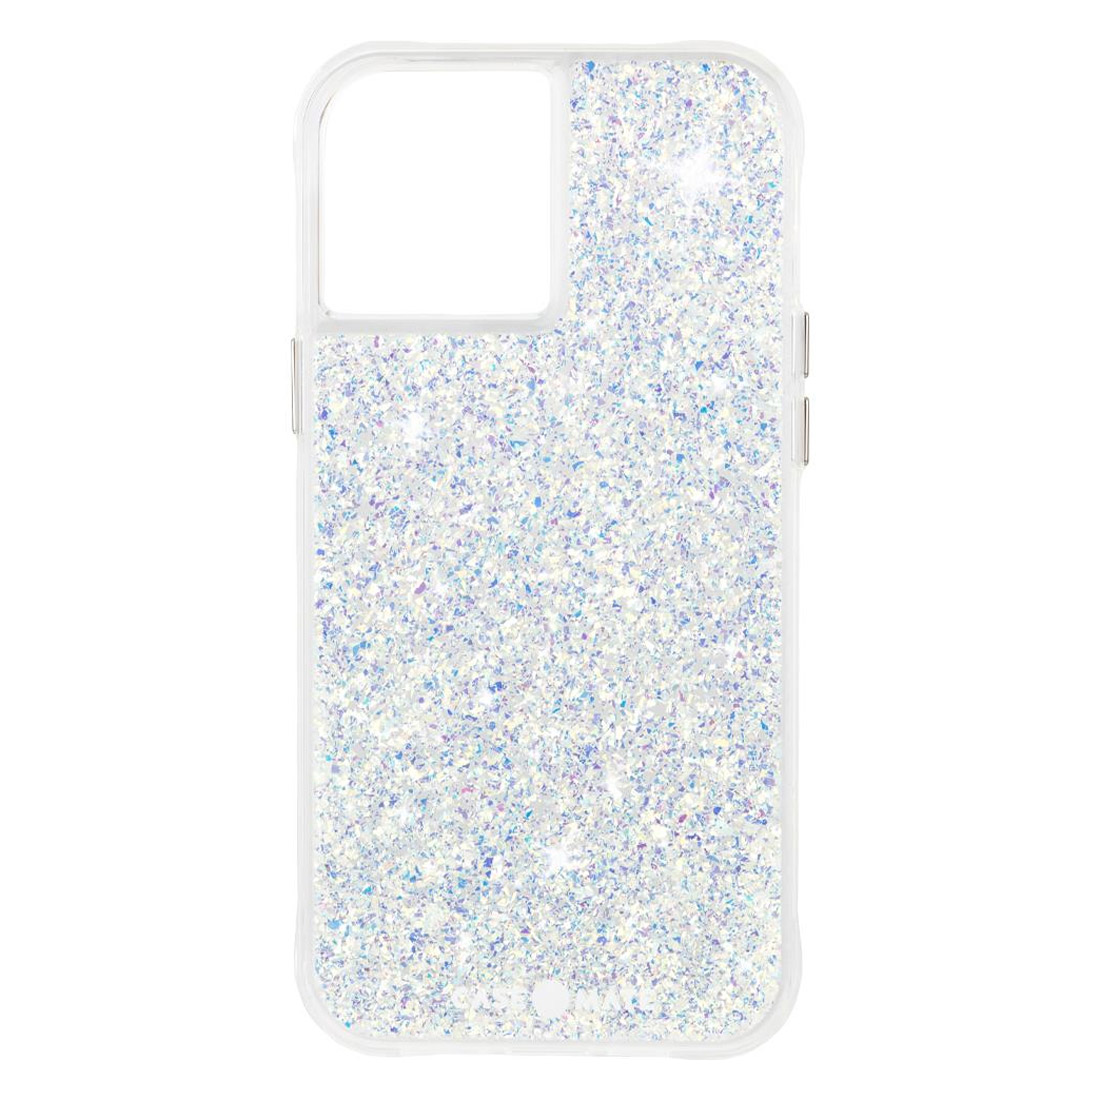 Case-Mate Twinkle Case For iPhone 12 Pro Max - Stardust Clear